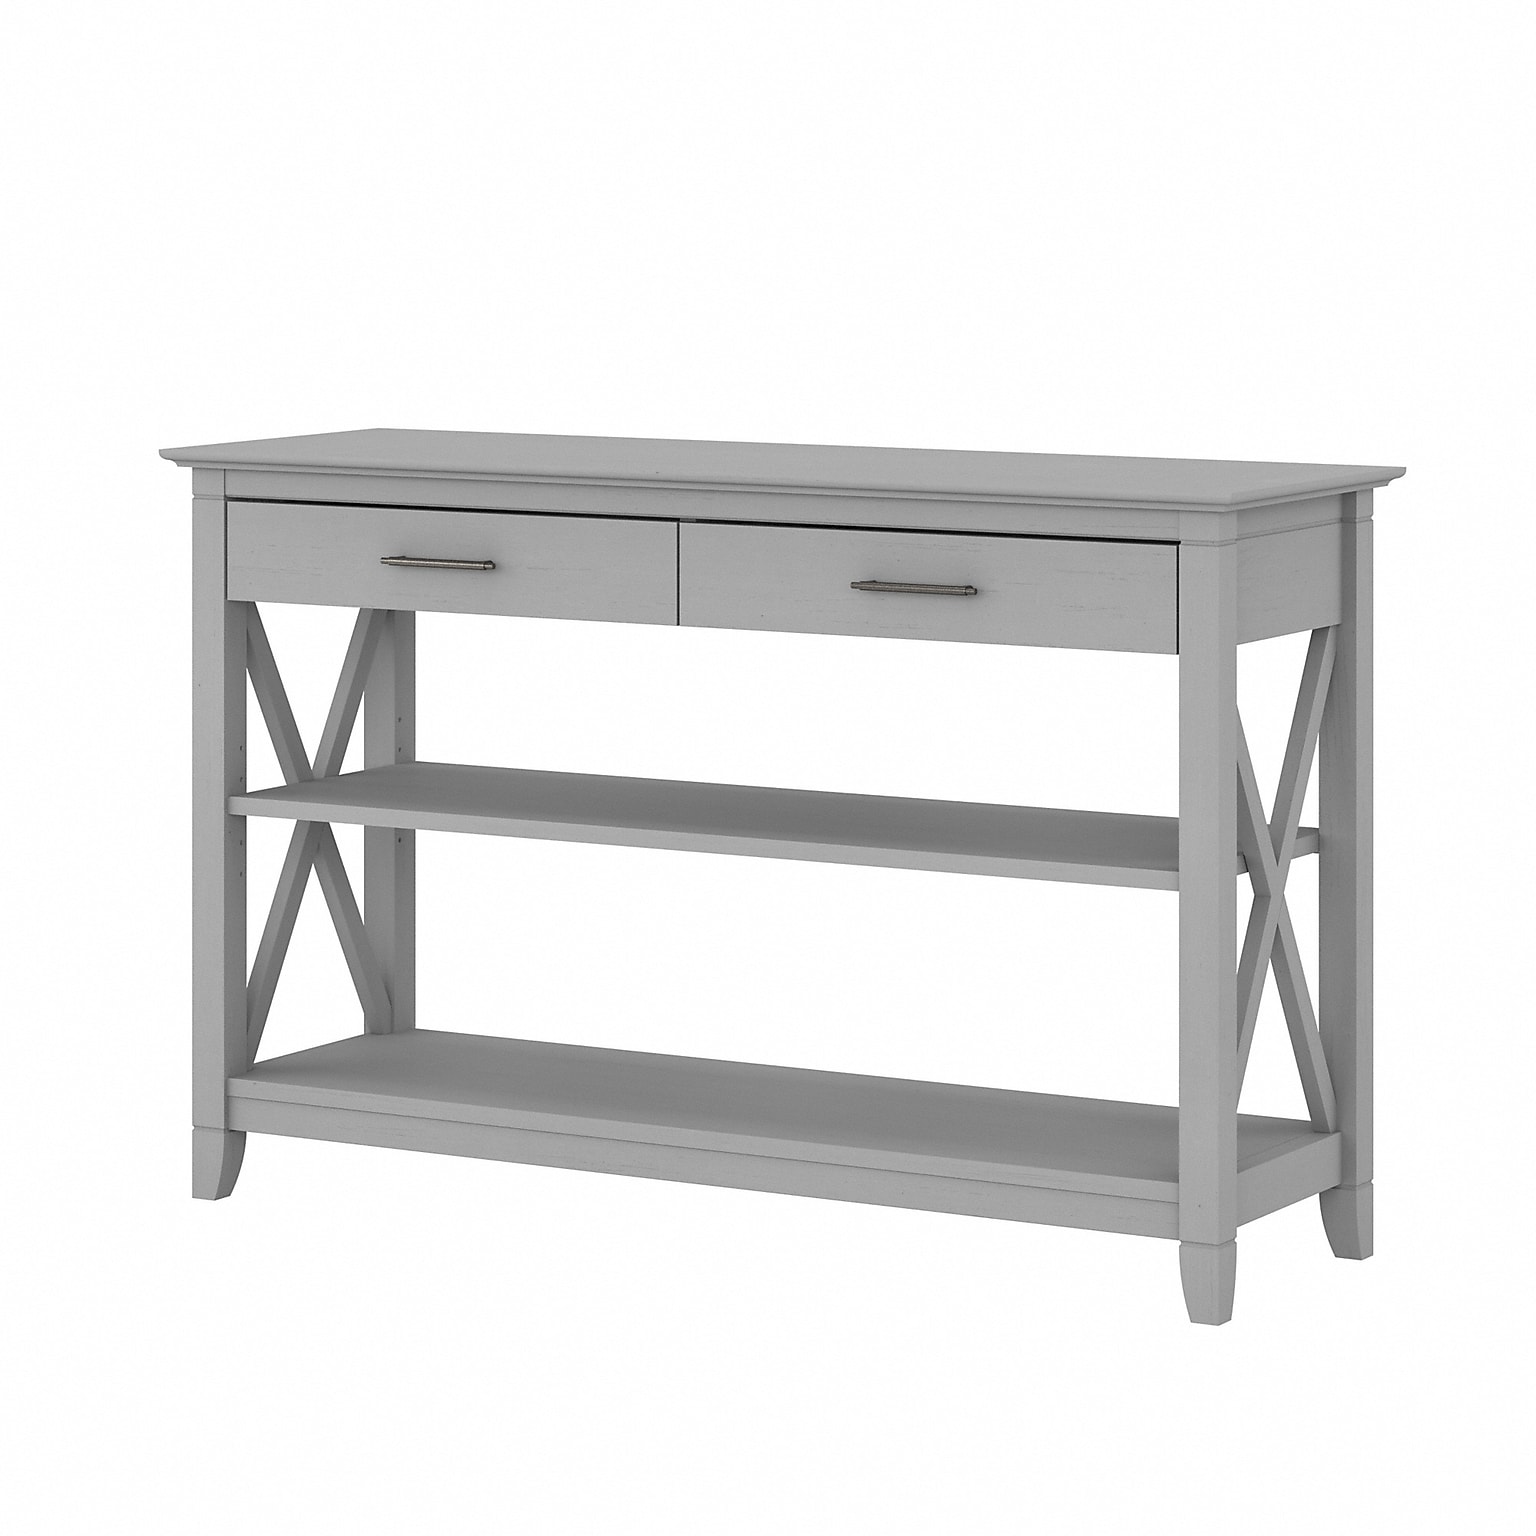 Bush Furniture Key West 47W Console Table with Drawers and Shelves, Cape Cod Gray (KWT248CG-03)